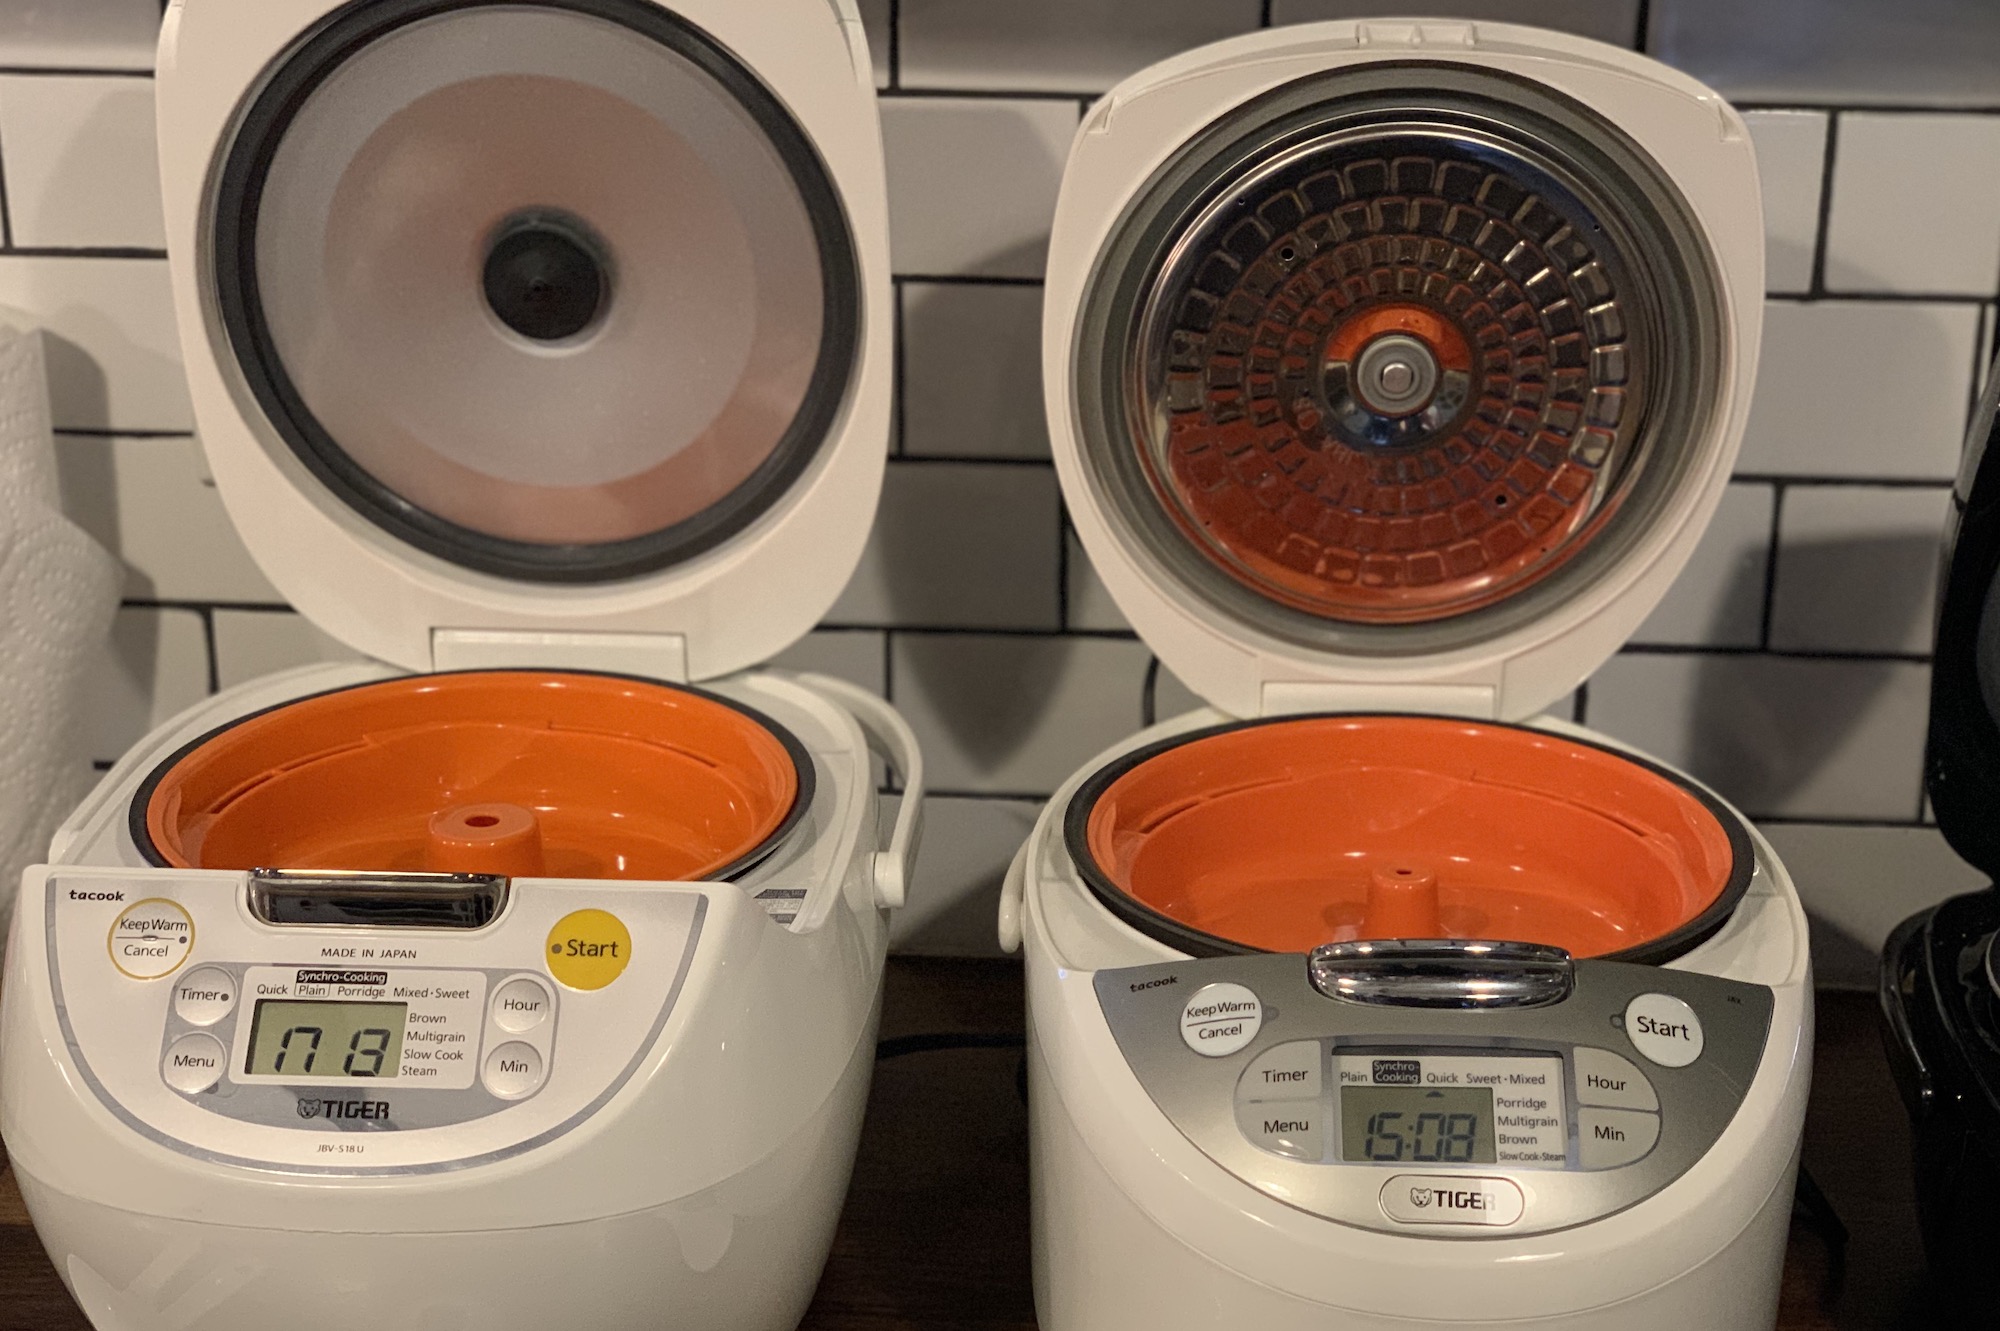 https://blog.bestbuy.ca/wp-content/uploads/2020/04/rice-cookers-review.jpg